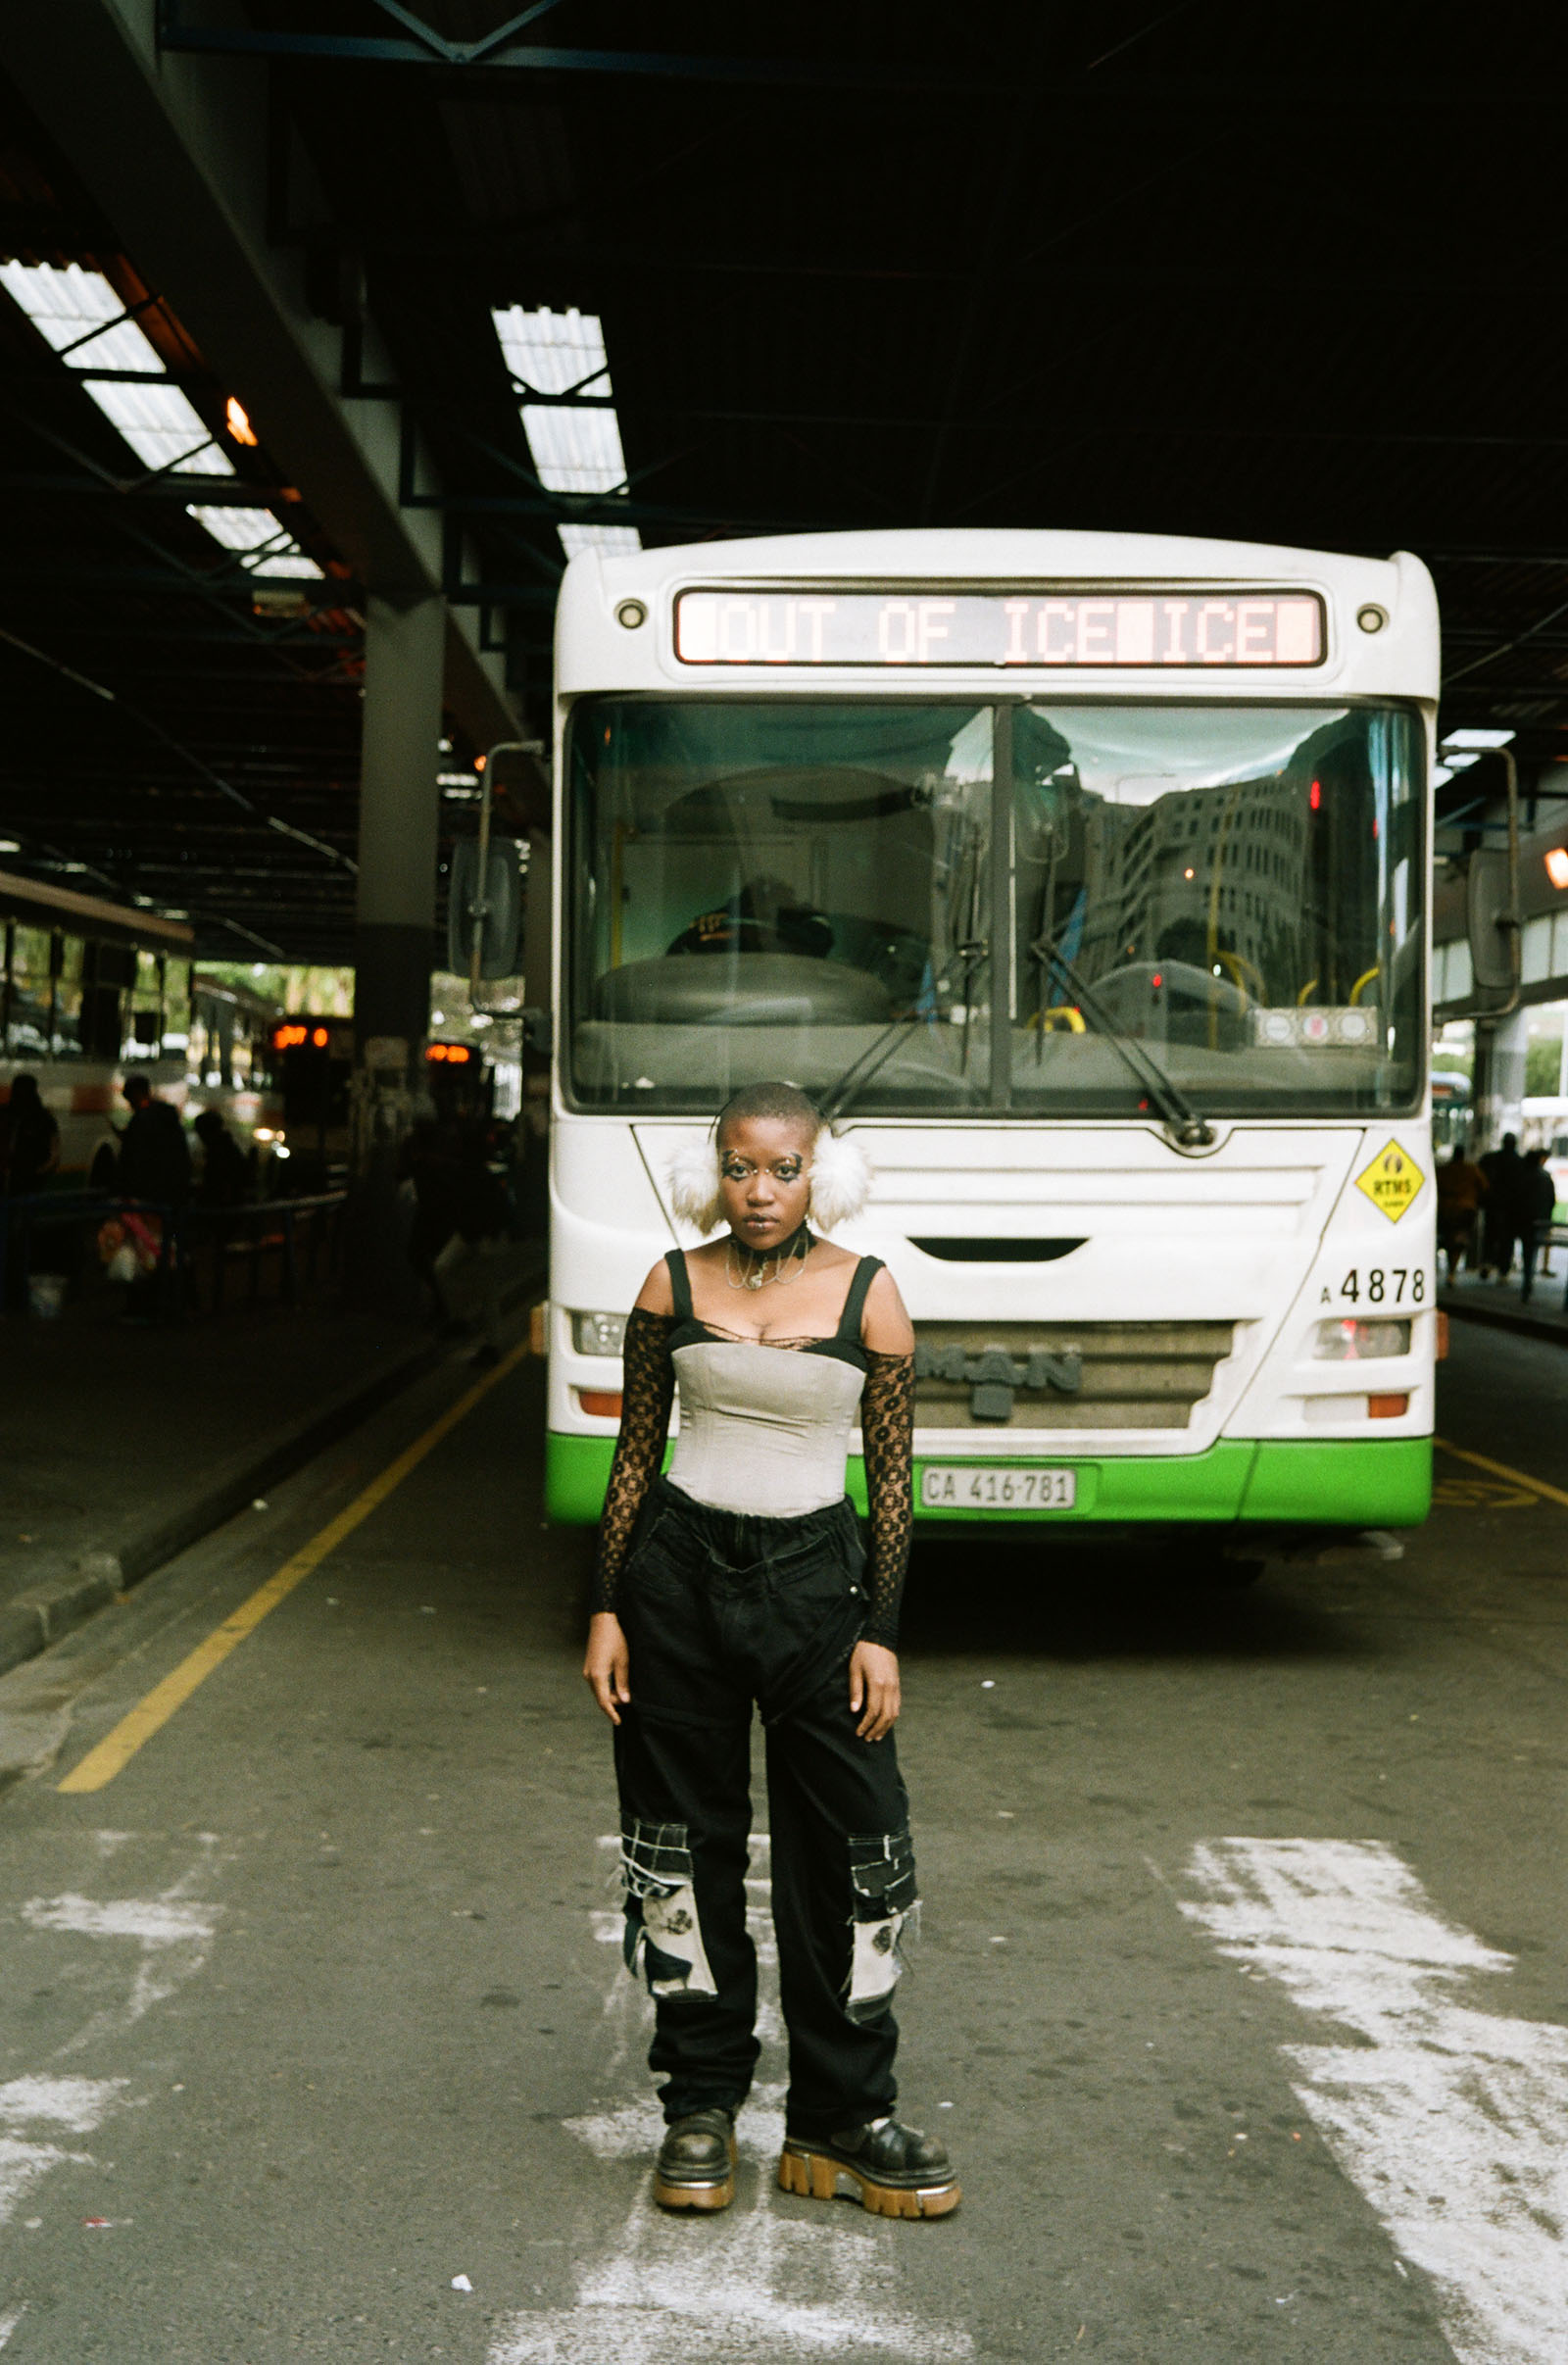 A woman poses, standing in front of a bus.